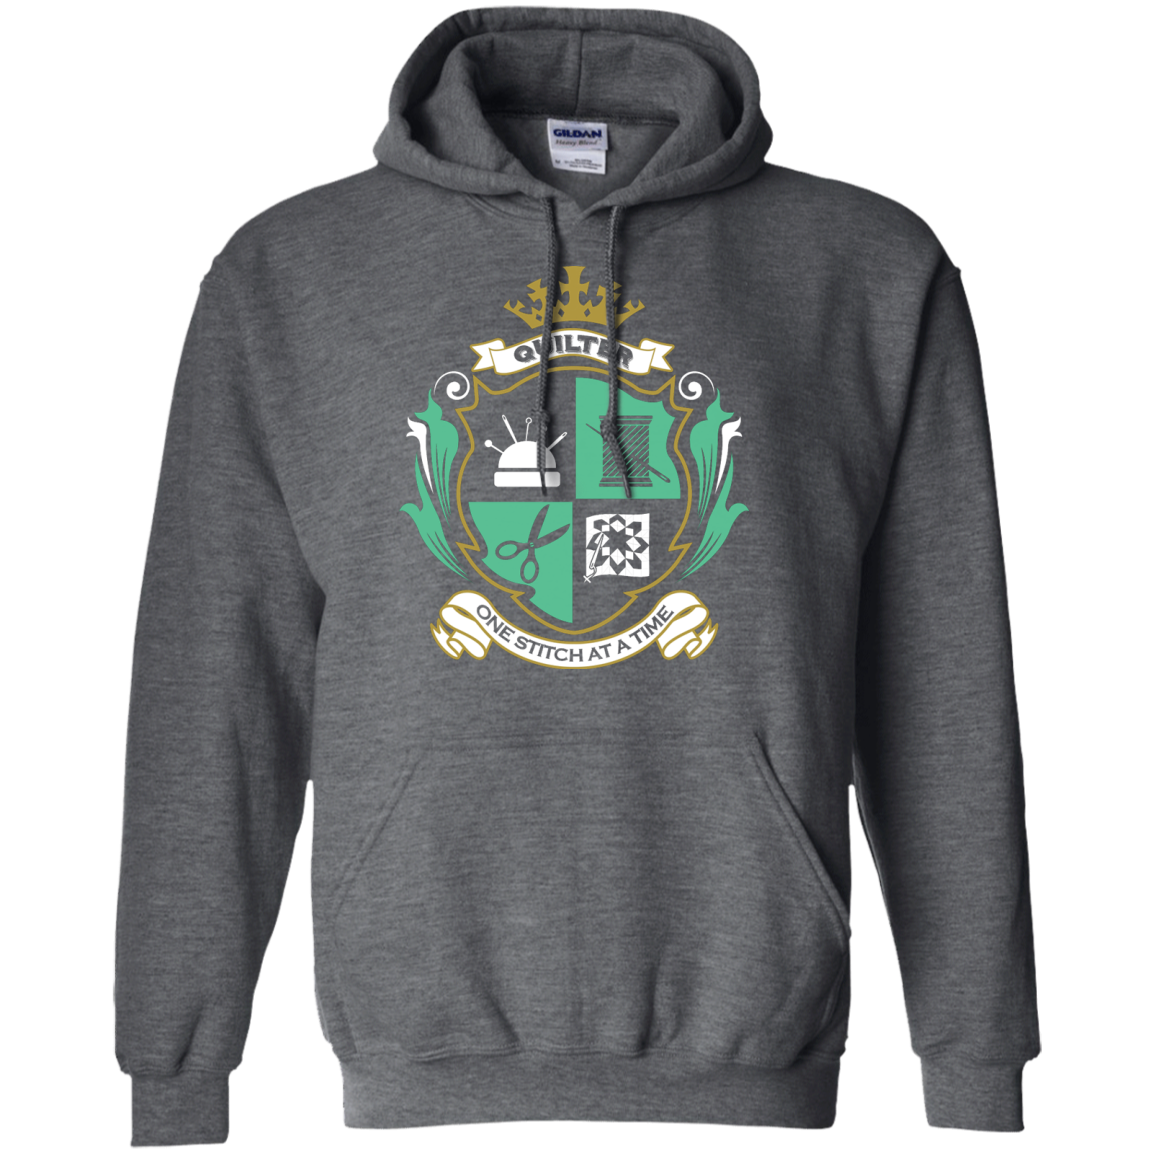 Quilters Motto Pullover Hoodies